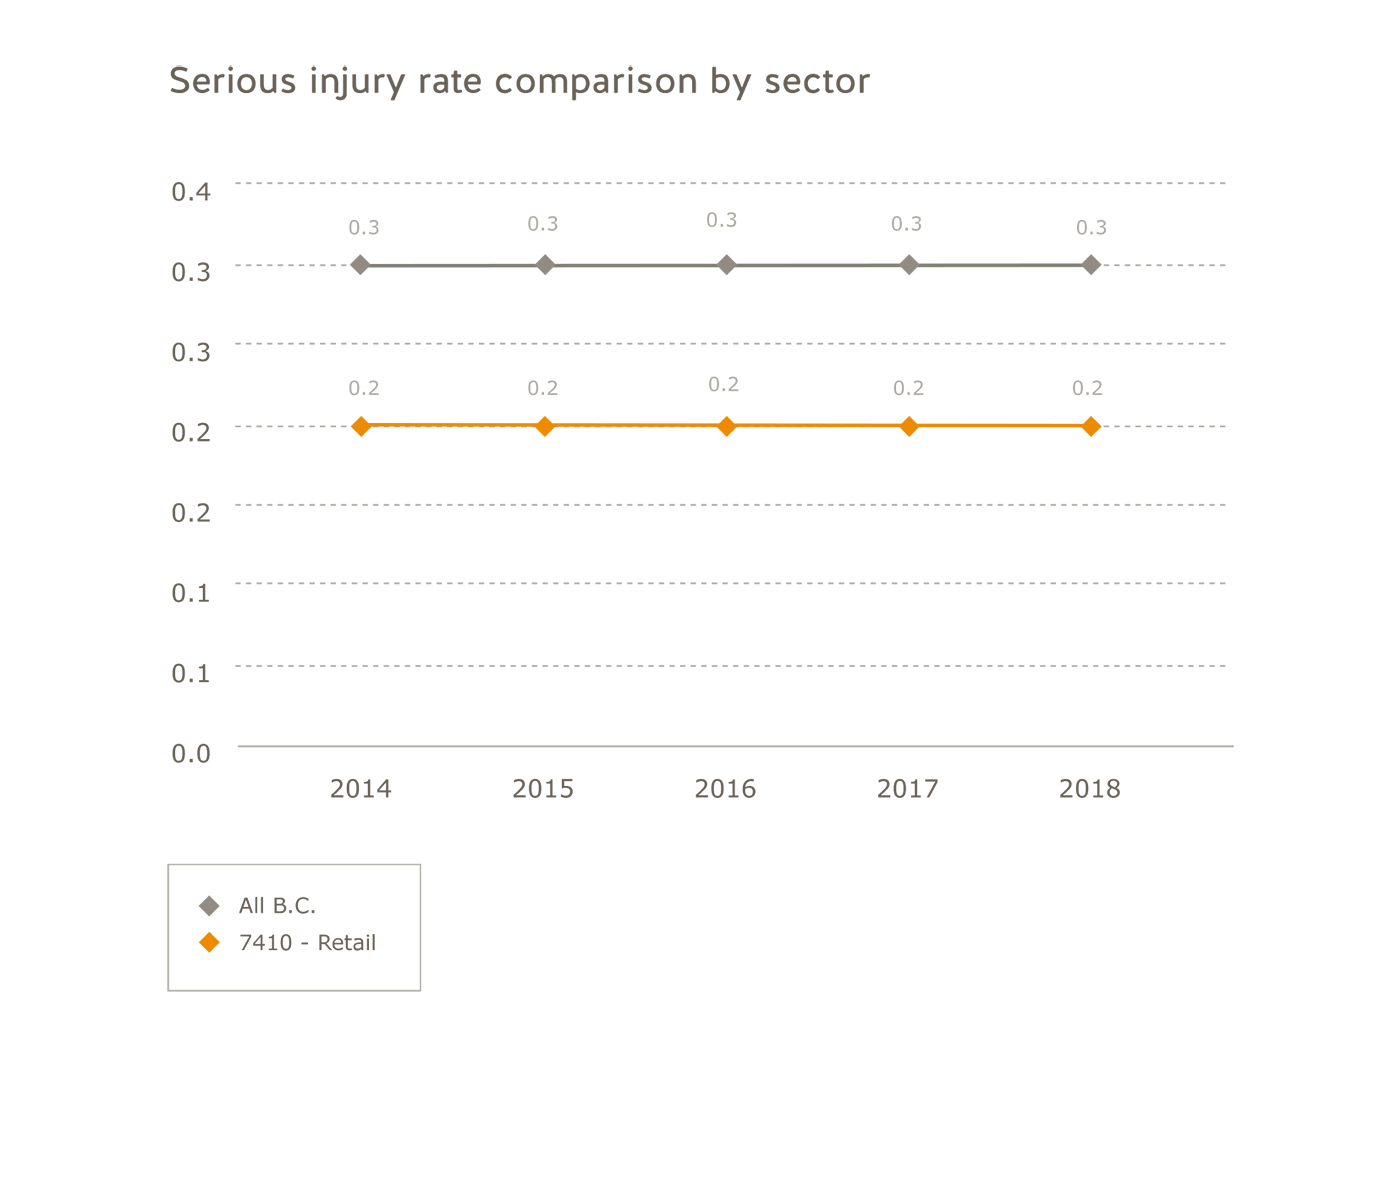 Retail industry serious injury rate comparison by sector for 2014 to 2018. All B.C.: 2014=0.3; 2015=0.3; 2016=0.3; 2017=0.3; 2018=0.3. Retail: 2014=0.2; 2015=0.2; 2016=0.2; 2017=0.2; 2018=0.2